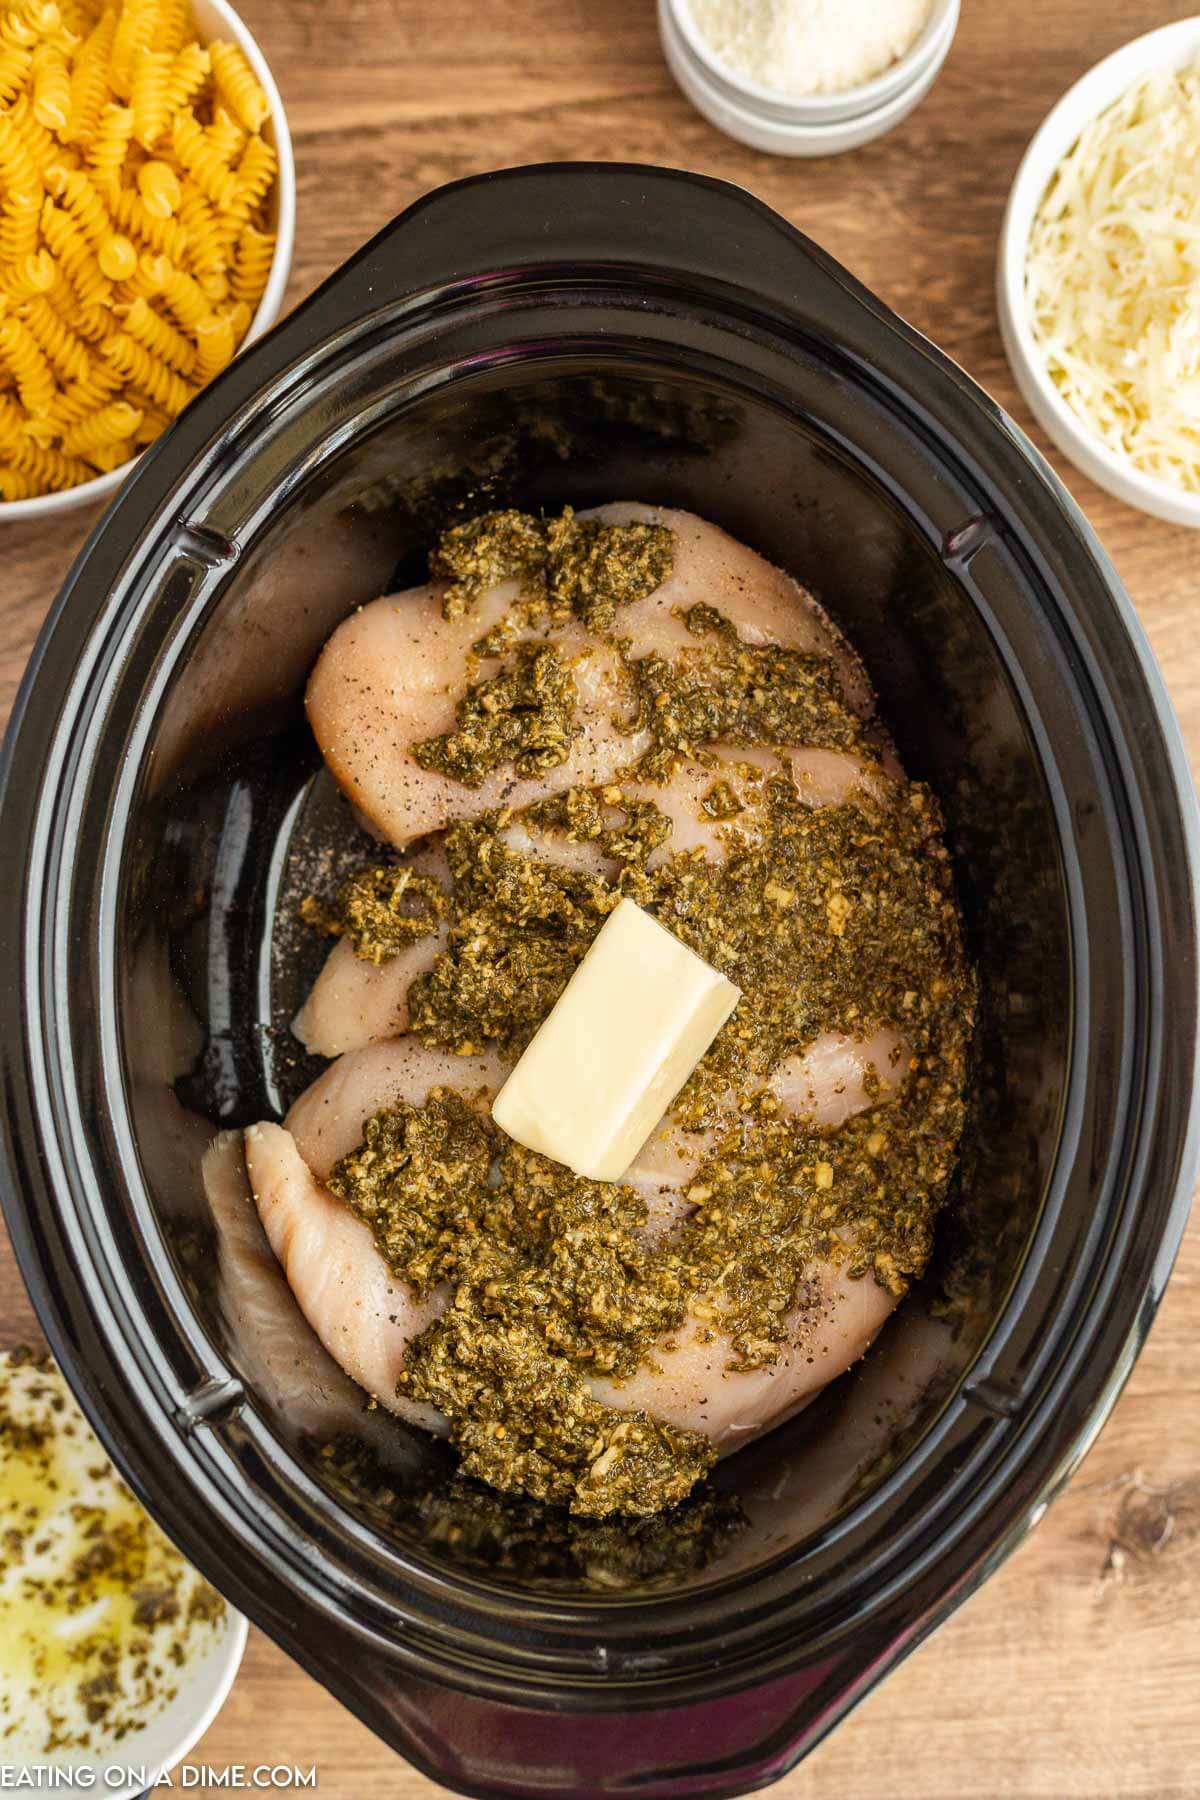 Placing the chicken breast in the slow cooker and topping with butter and pesto